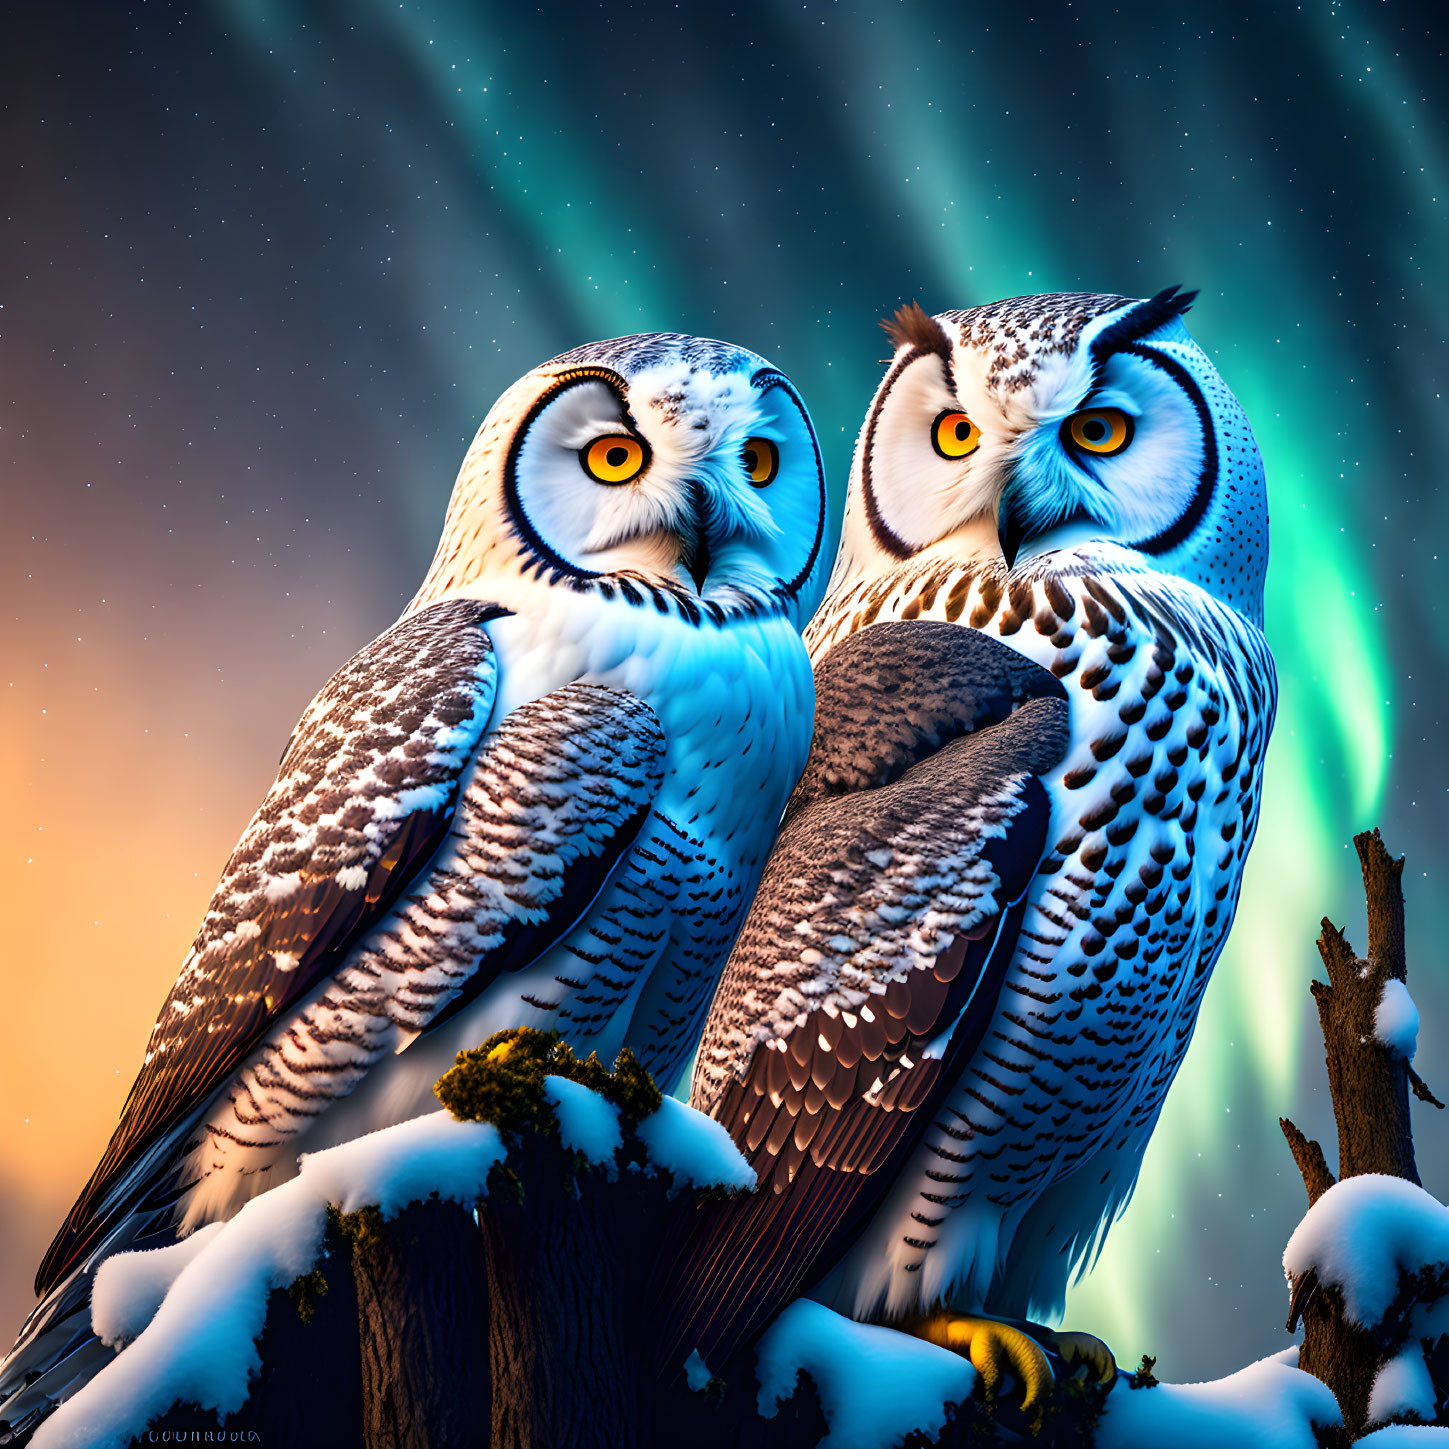 The owls by the Aurora Borealis